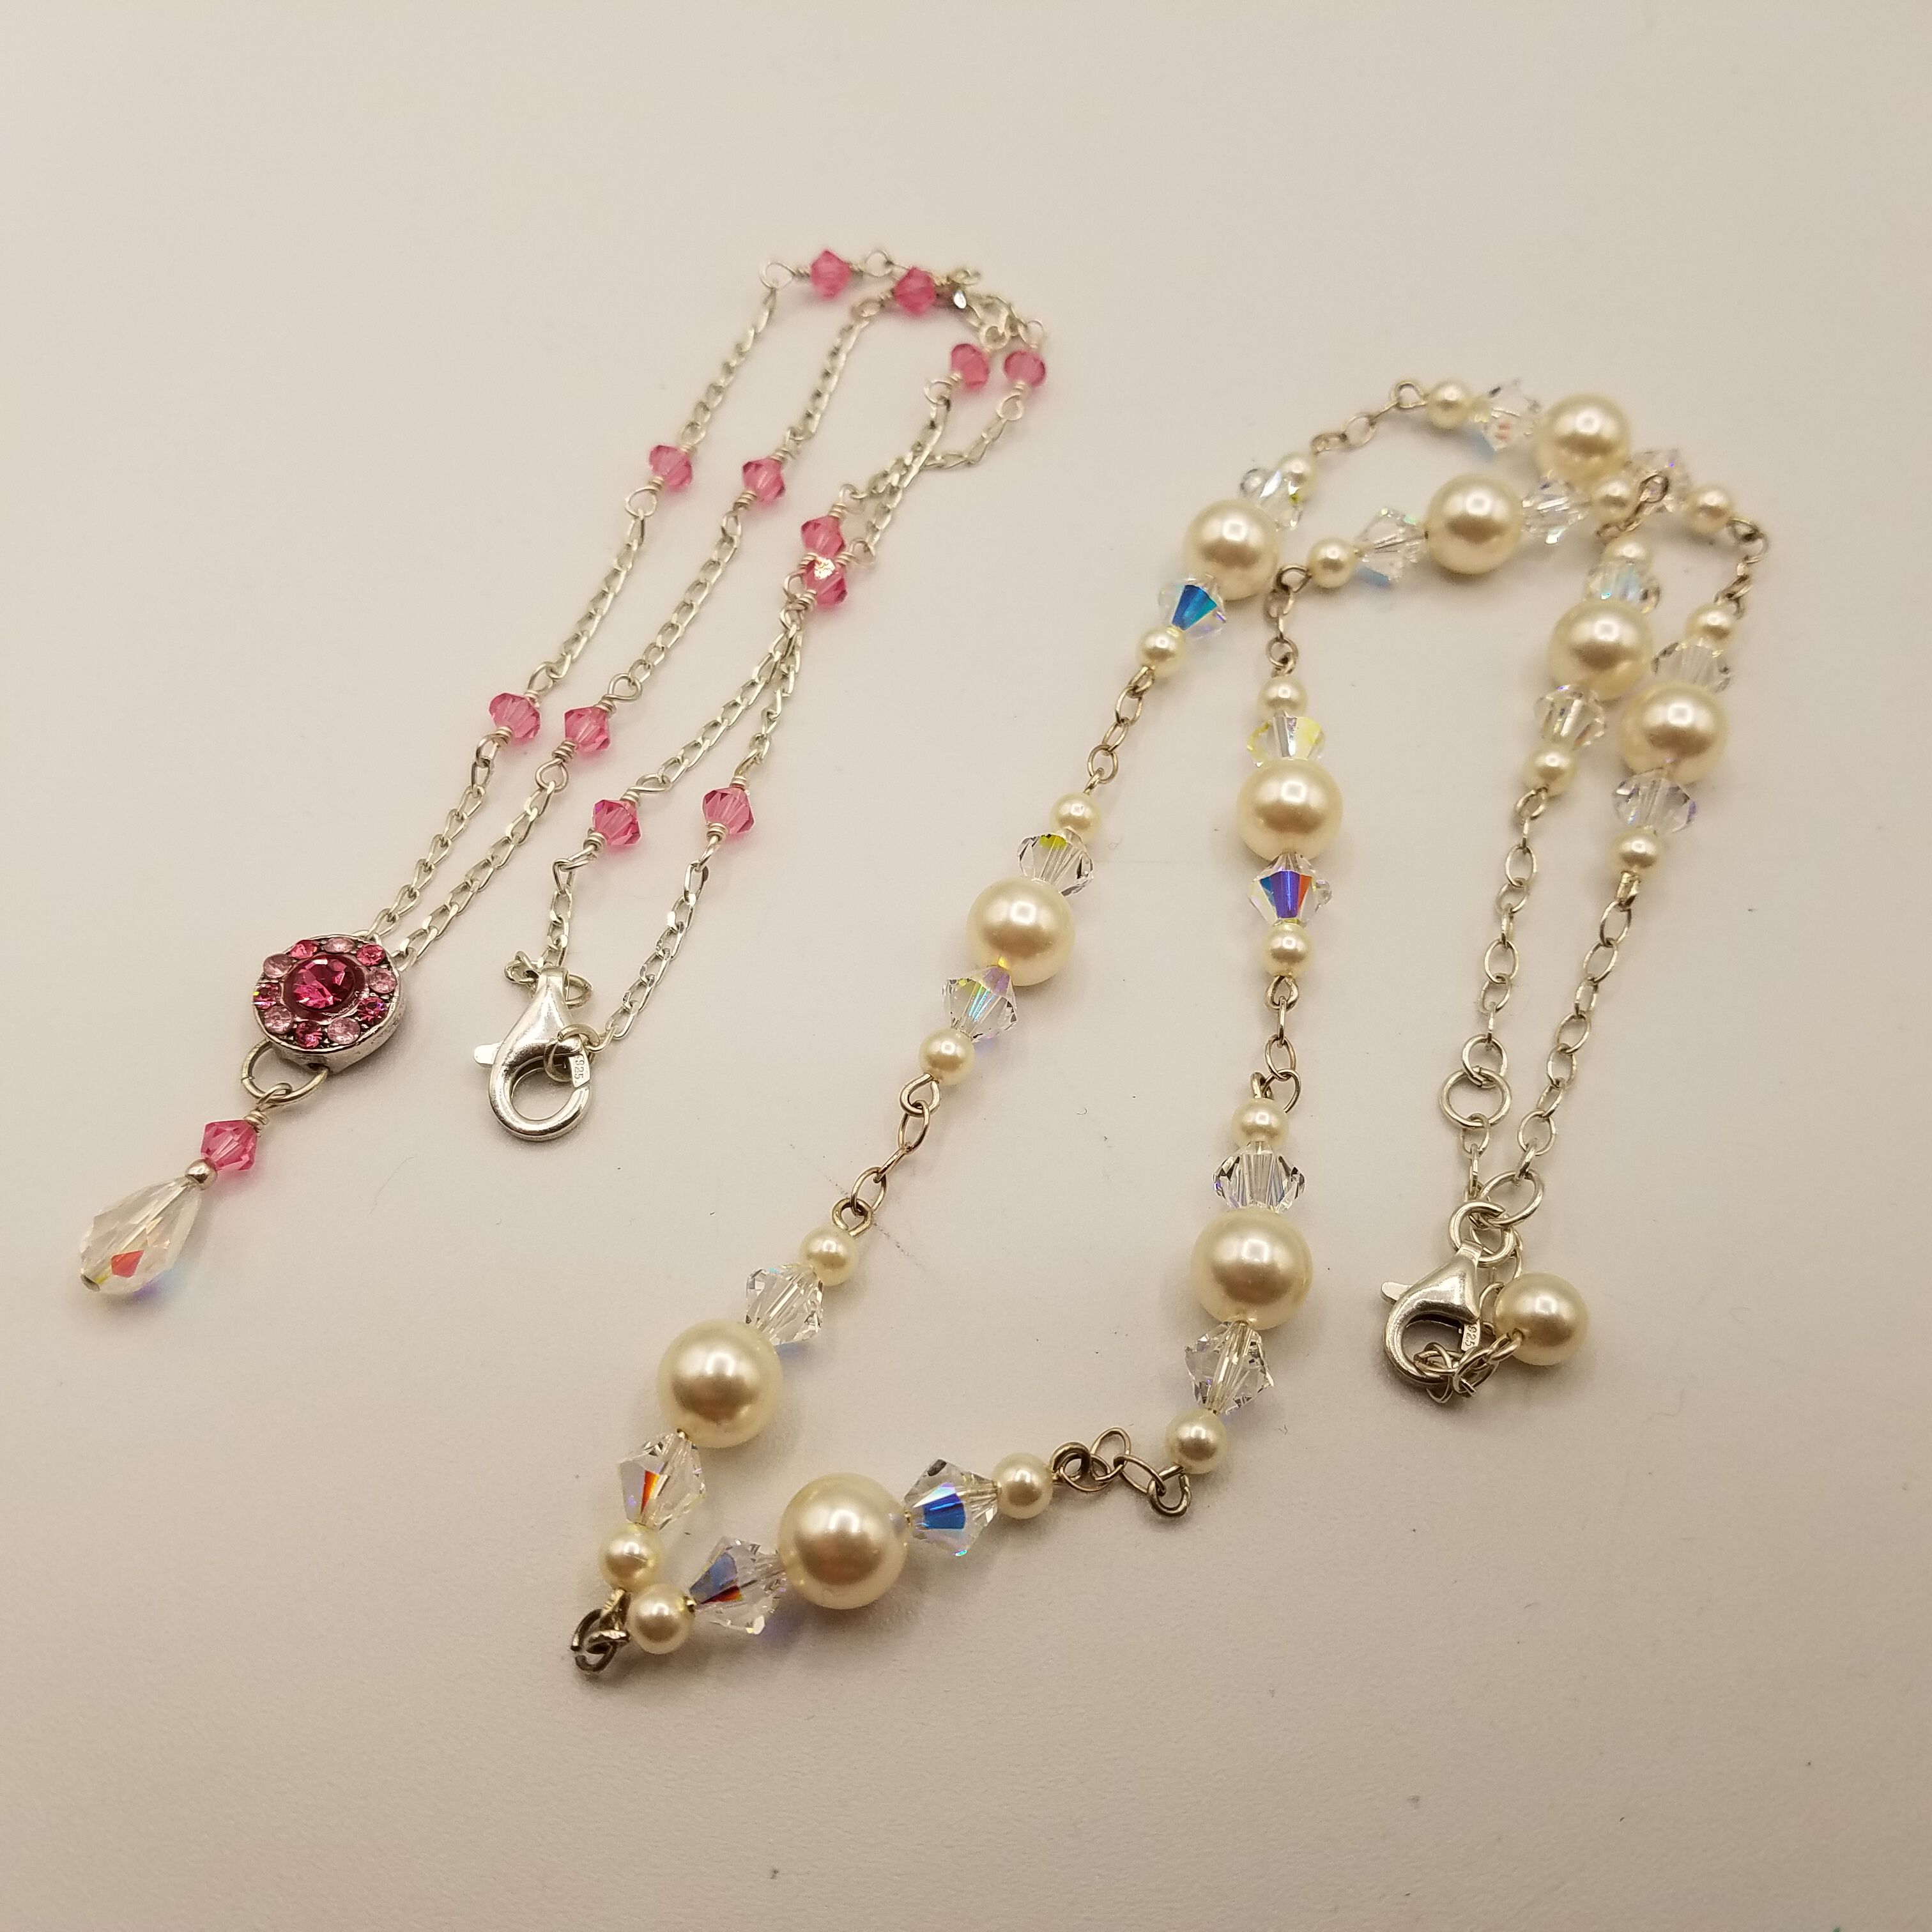 Buy the 925 Sterling Silver Crystal + Faux Pearl Station Necklaces